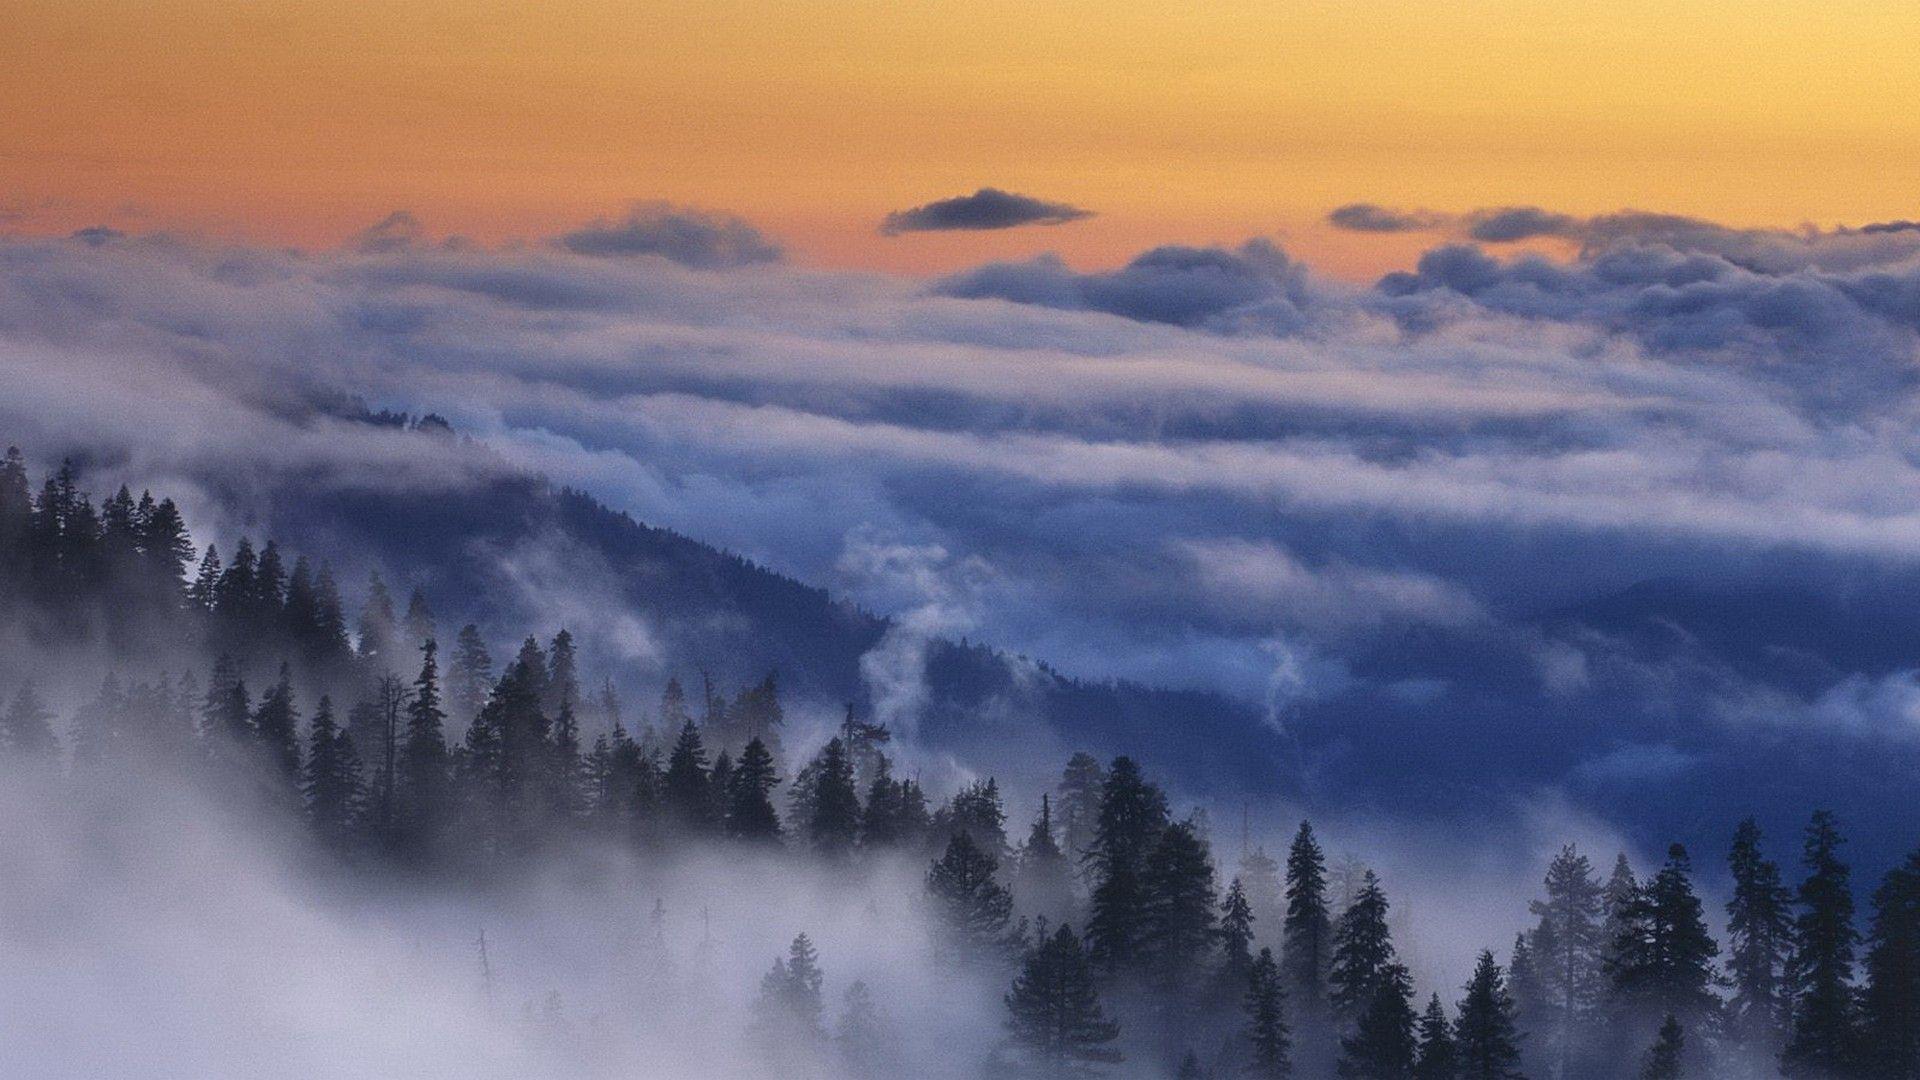 HD Clouds Over Forests At Sunset Wallpapers